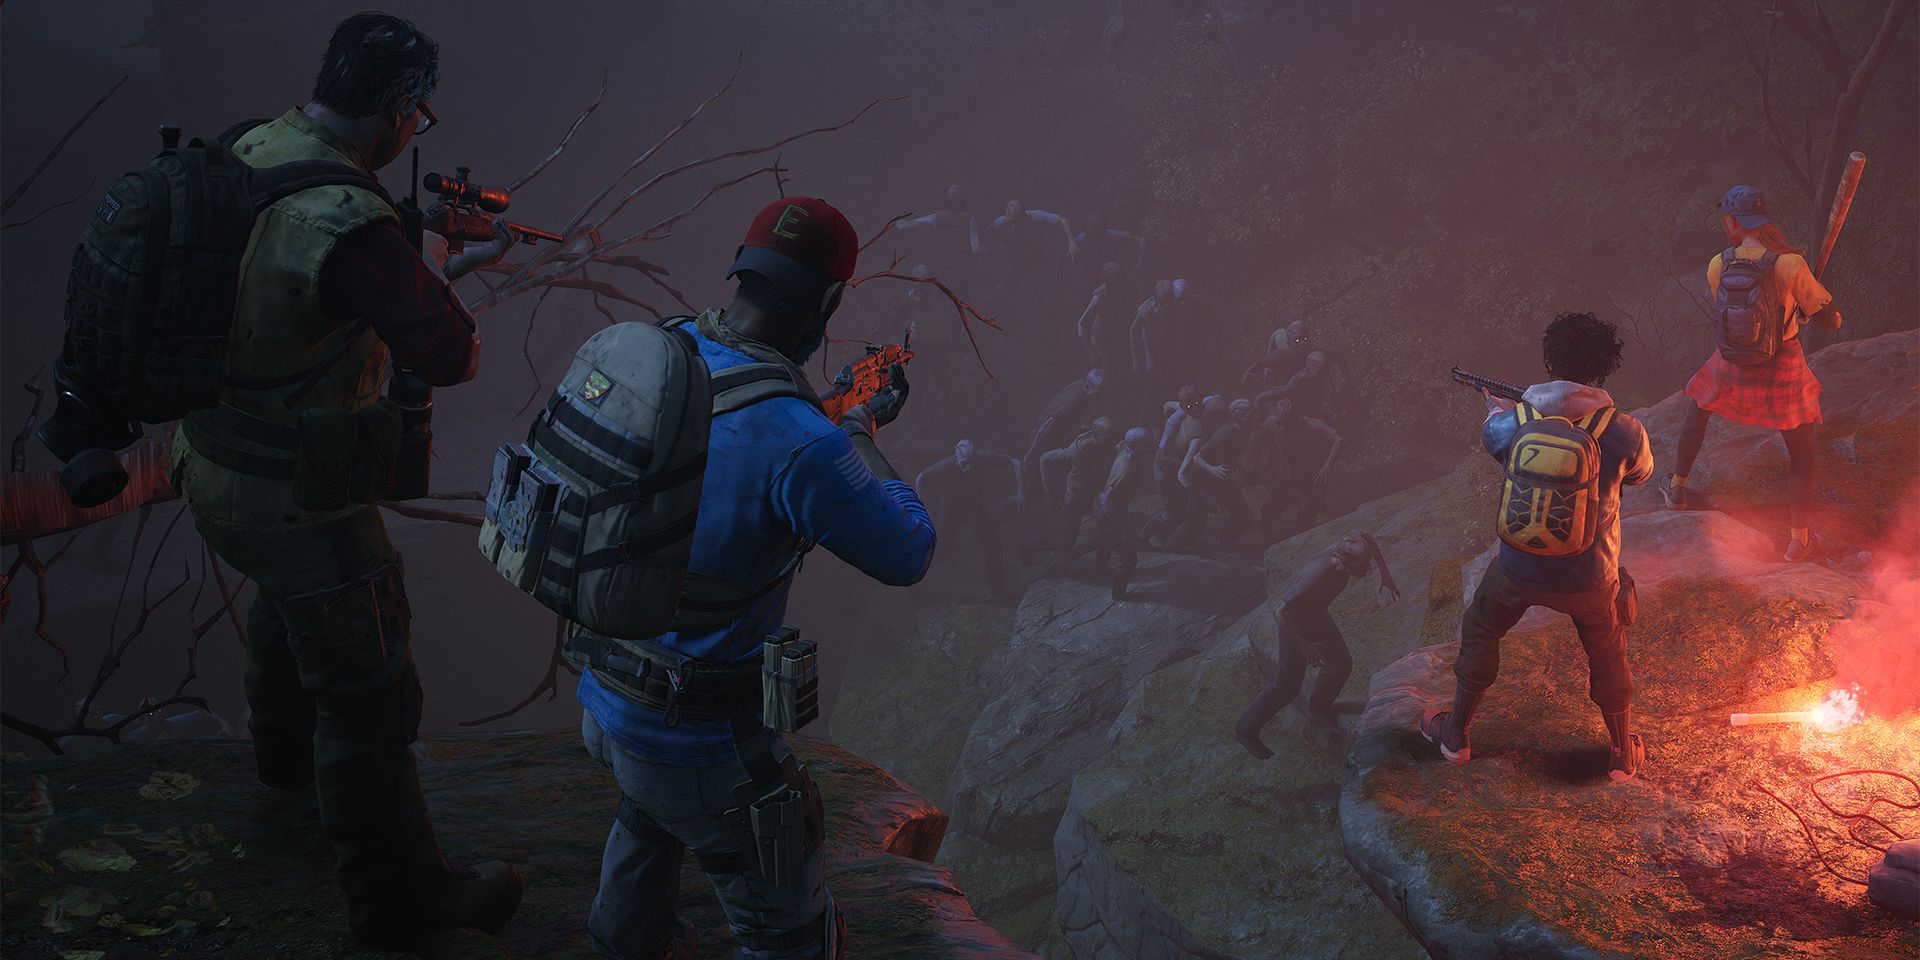 Image has 4 players fighting zombies